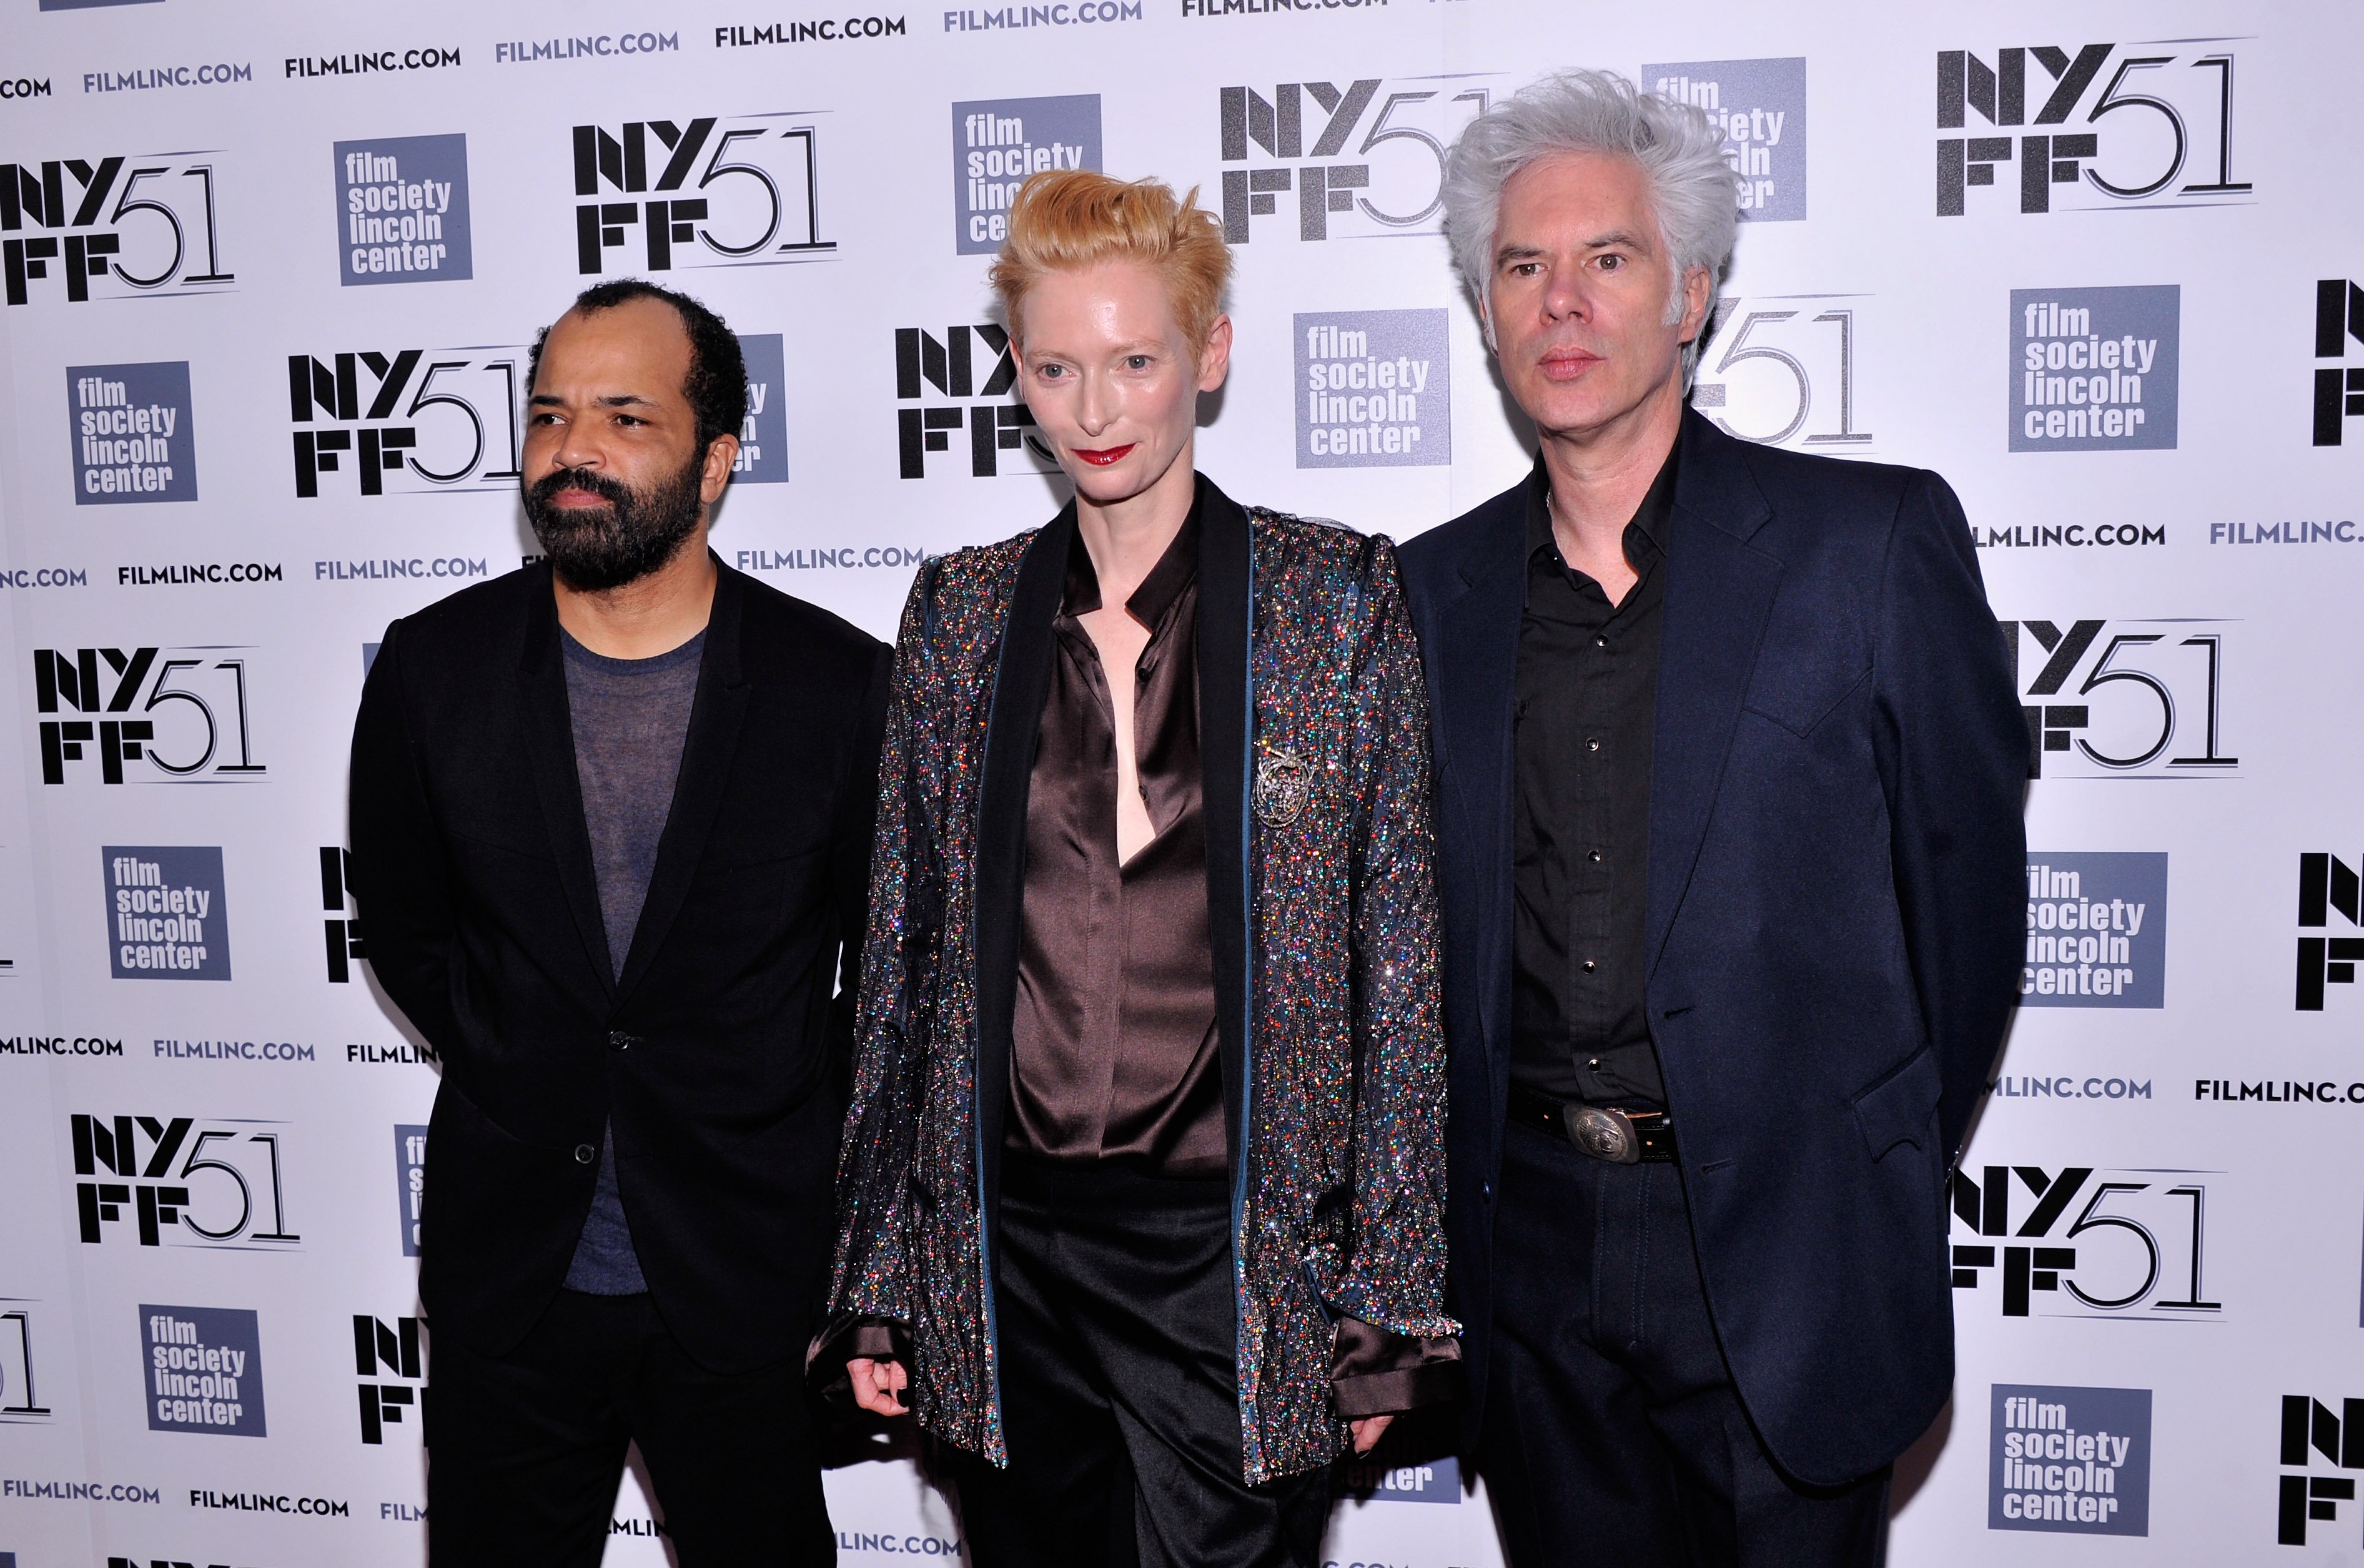 Jeffrey Wright, Tilda Swinton and director Jim Jarmusch attend the "Only Lovers Left Alive" premiere during the 51st New York Film Festival on October 10, 2013 in New York City. | Source: Getty Images